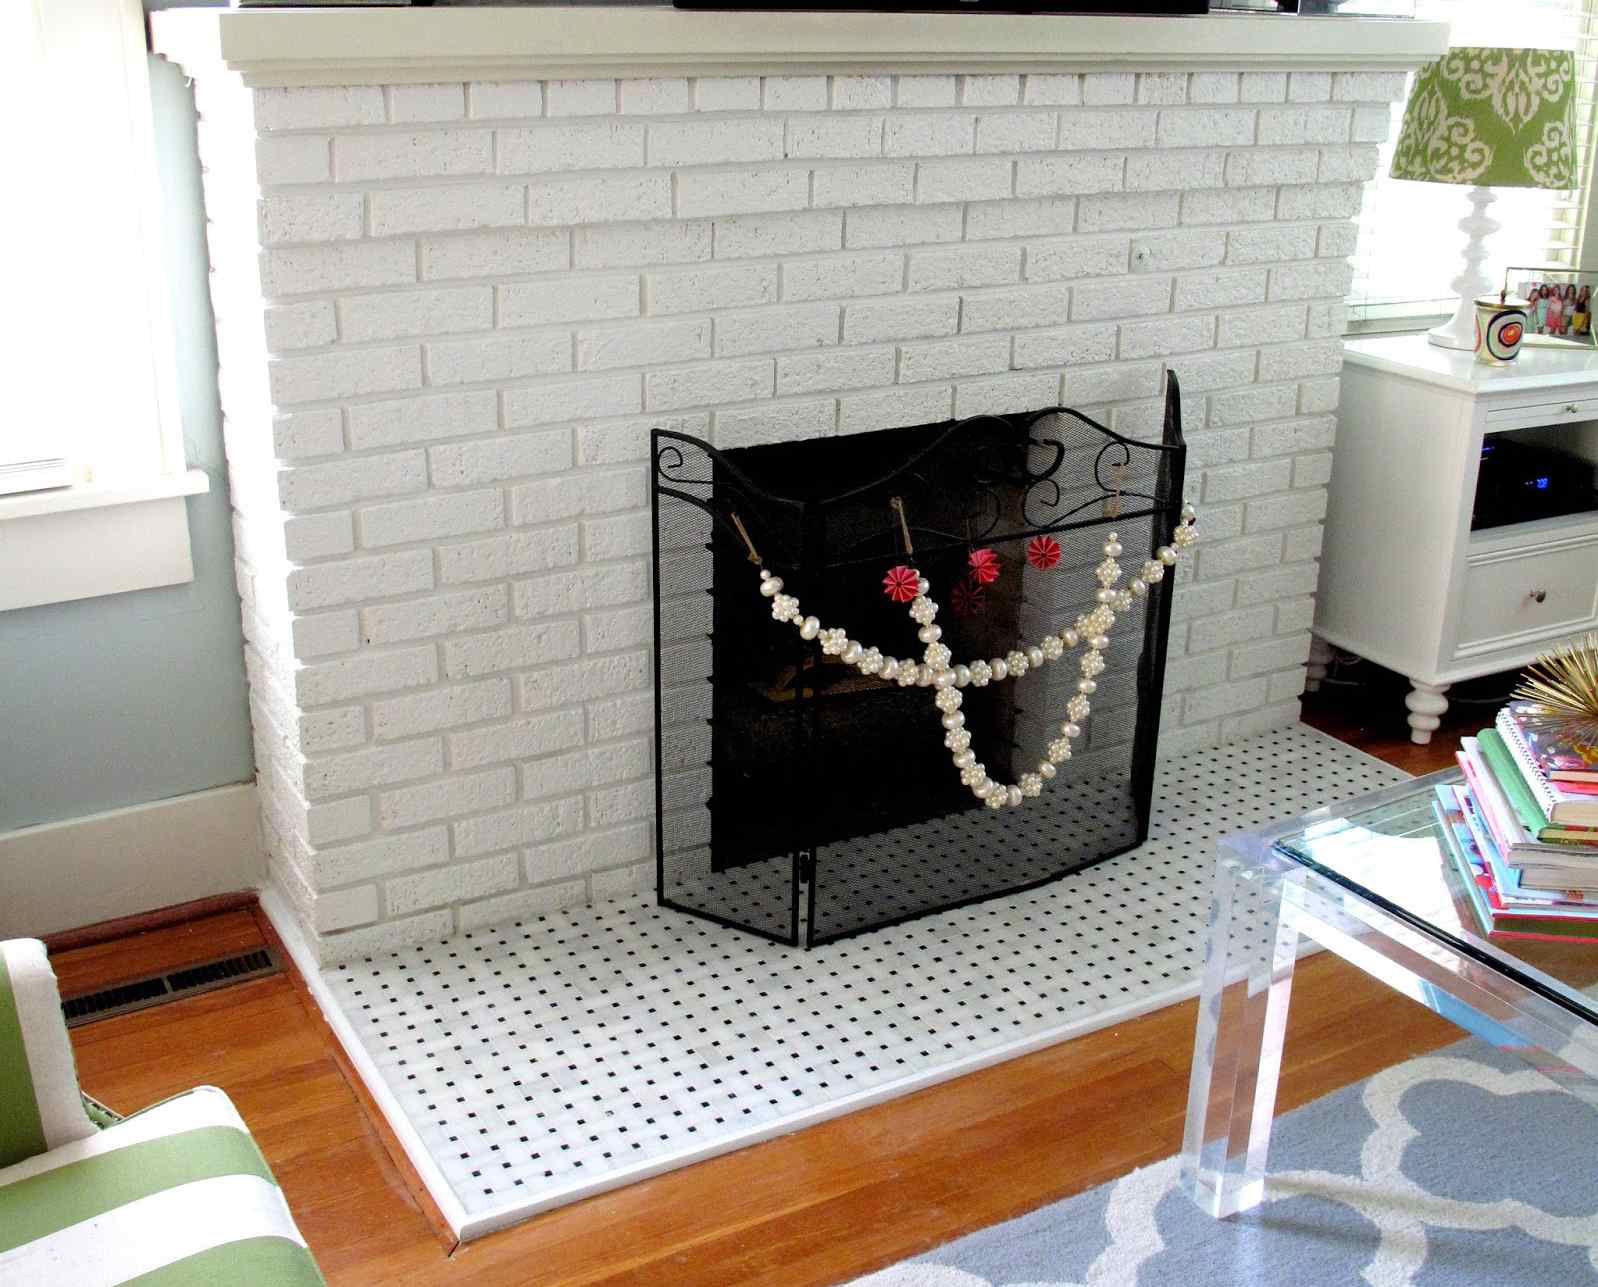 Fireplace Mantels for Sale Craigslist Awesome 25 Beautifully Tiled Fireplaces